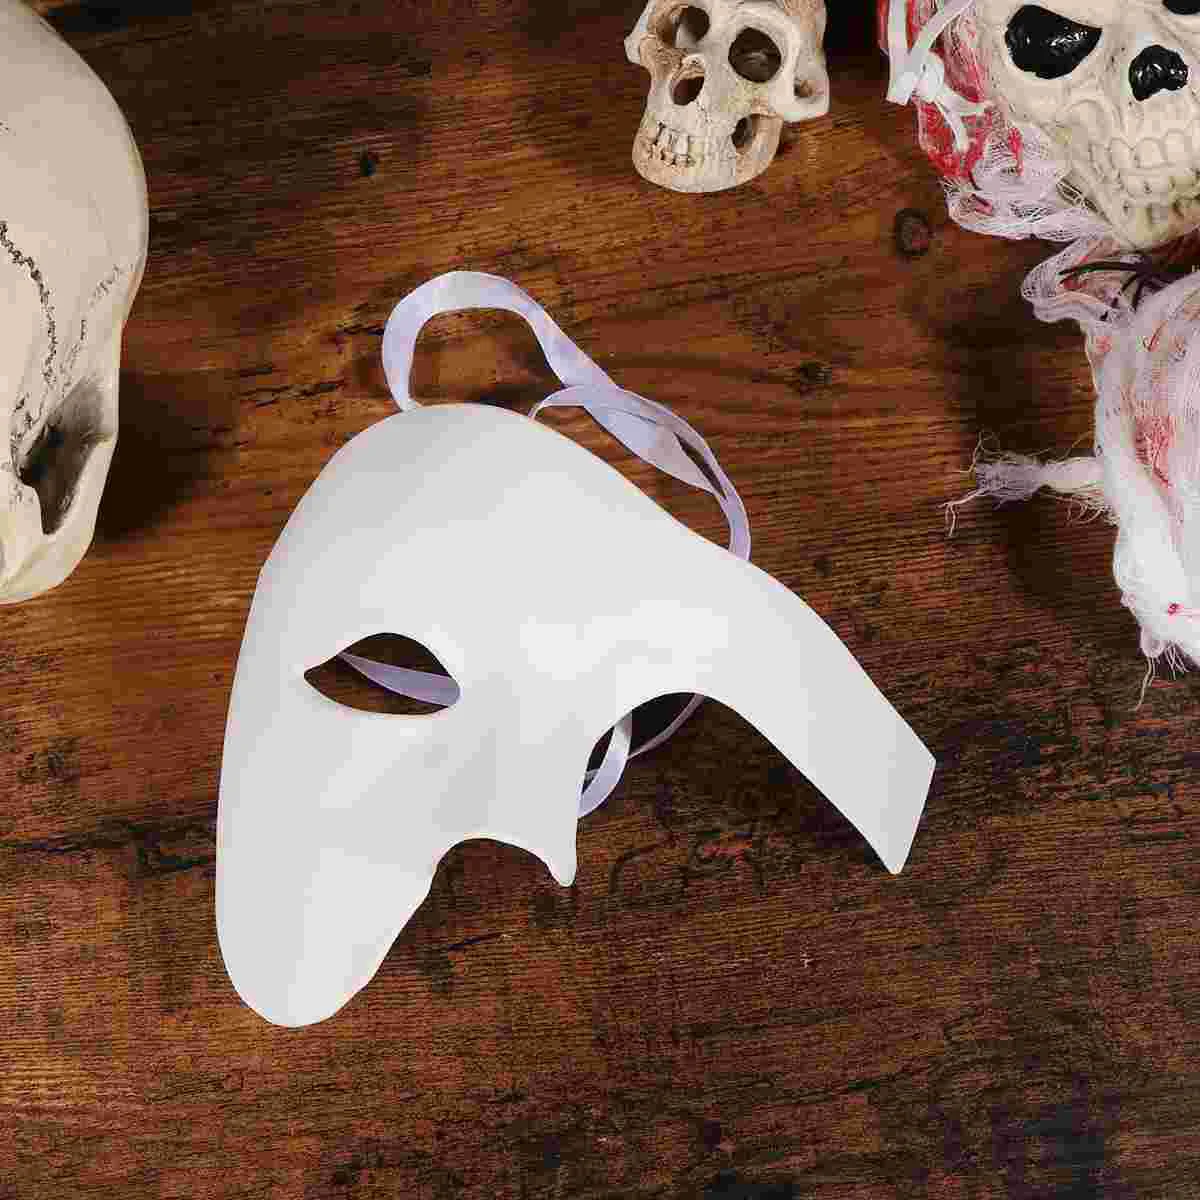 

Halloween One-eyed Mask Masquerade Mask Delicate Retro Solid Color Half Face Mask for Cosplay Party Festival White Men